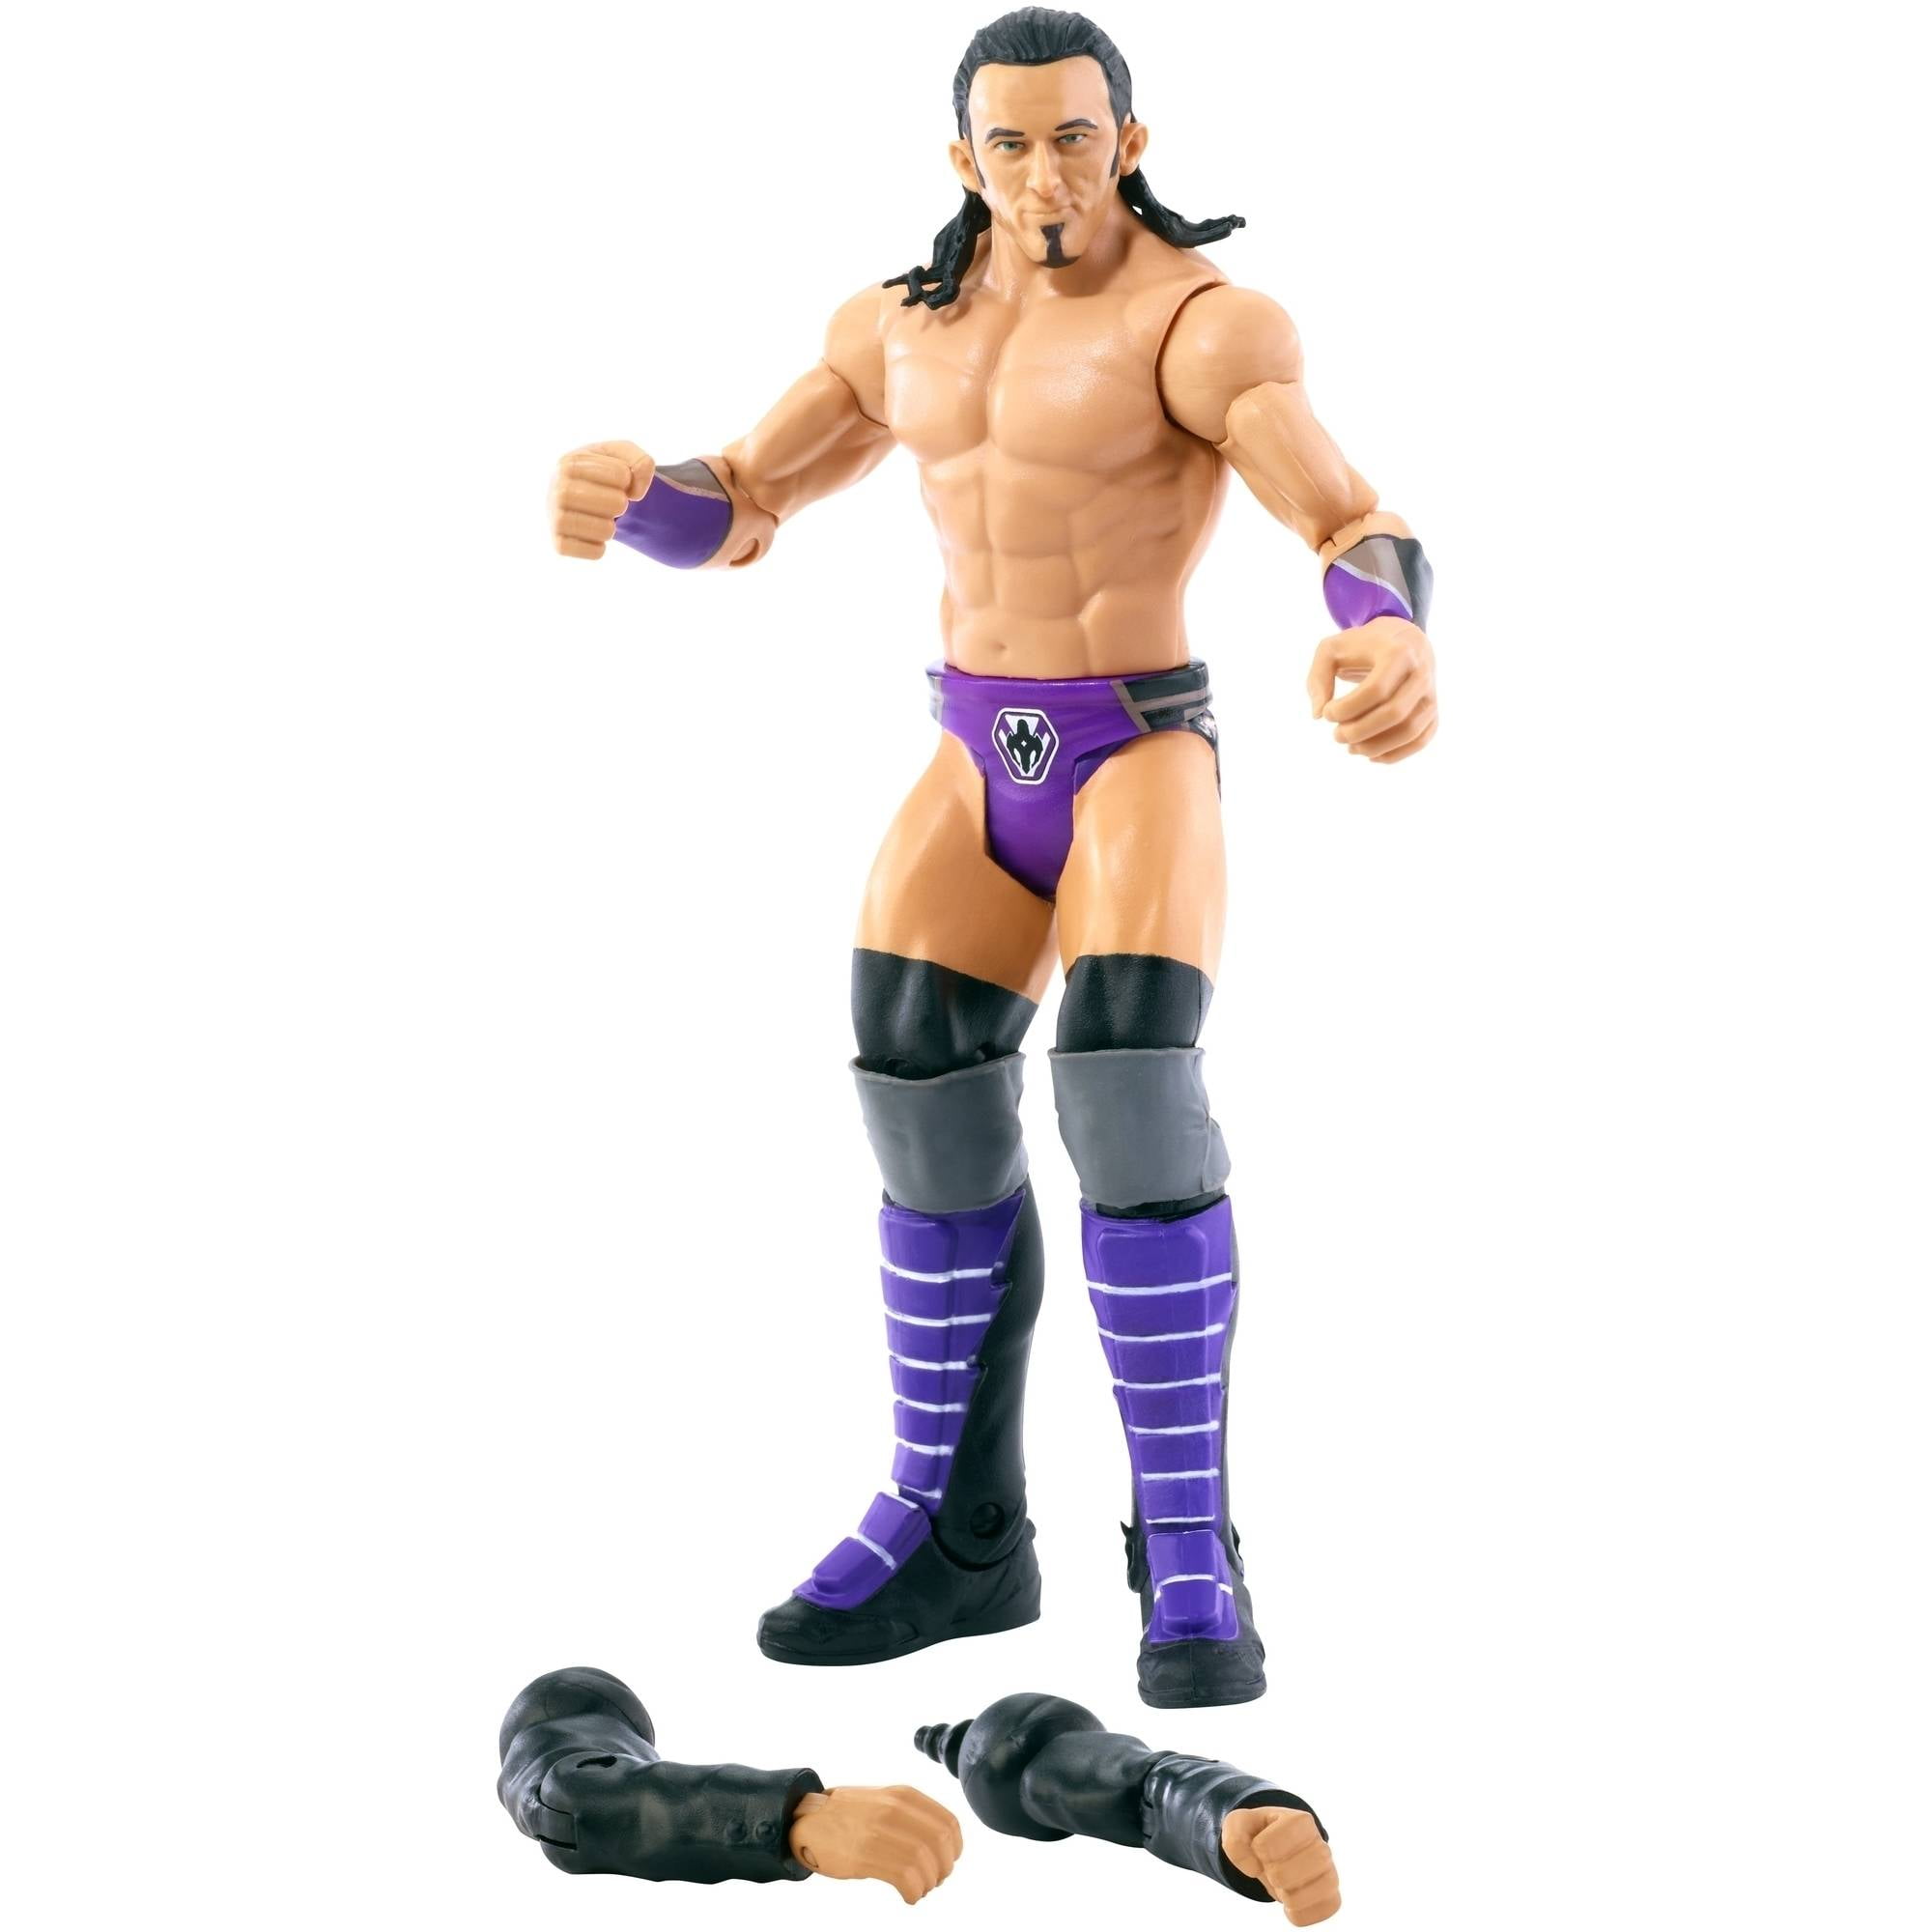 Toy WWE Wrestling Heroes Fight Super Star Alberto Del Rio Mexico Mattel Ages 6 